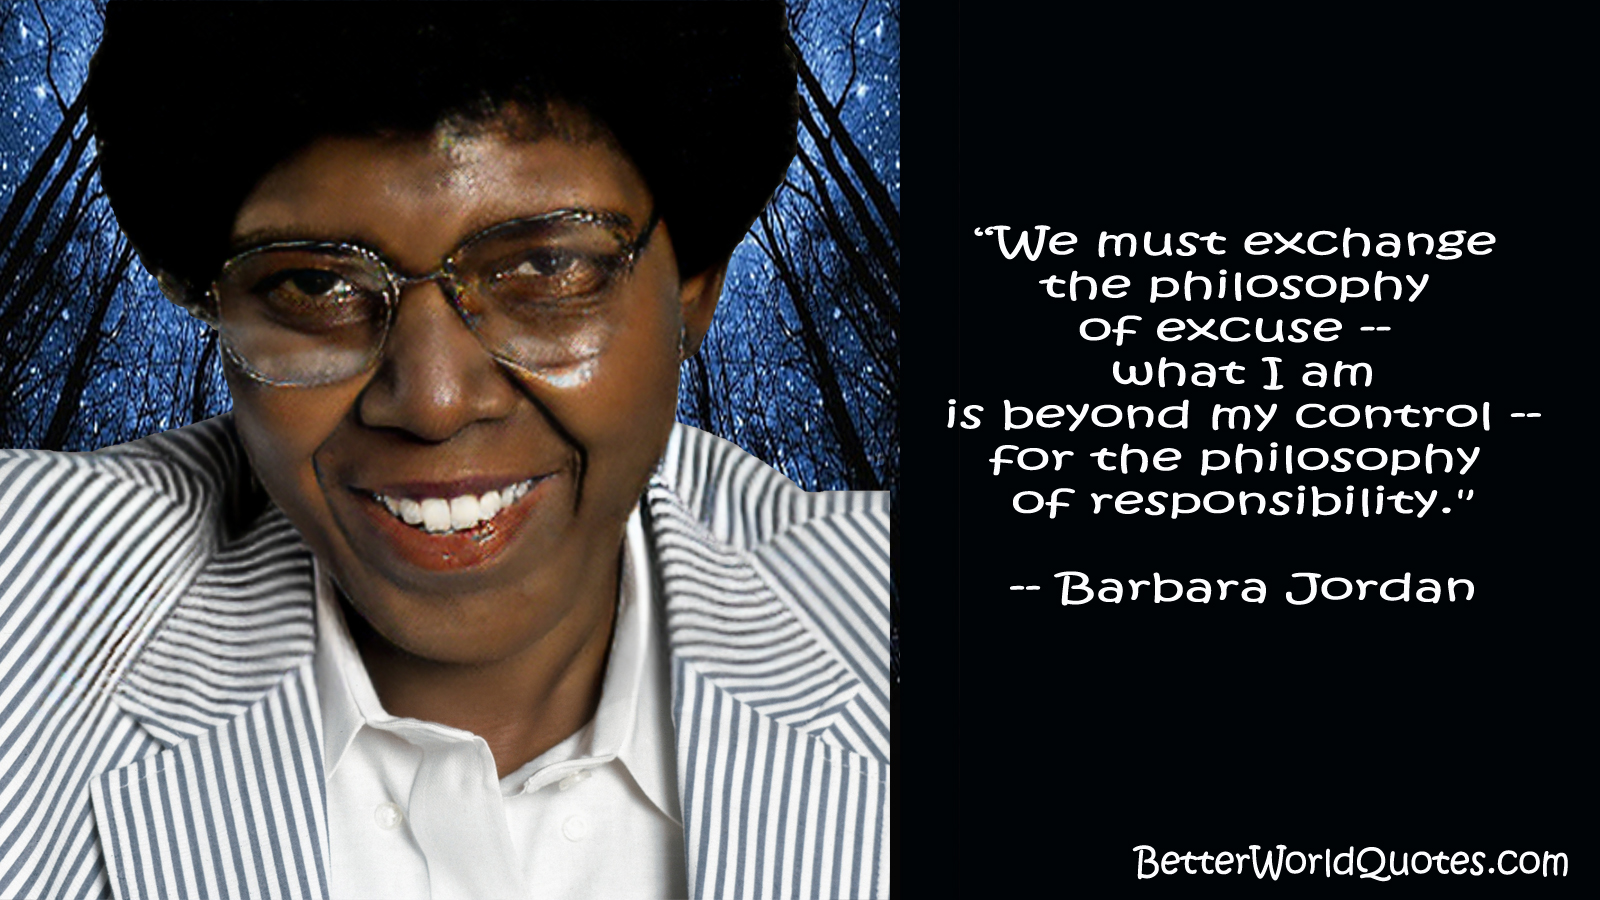 Barbara Jordan: We must exchange the philosophy of excuse -- what I am is beyond my control for the philosophy of responsibility.